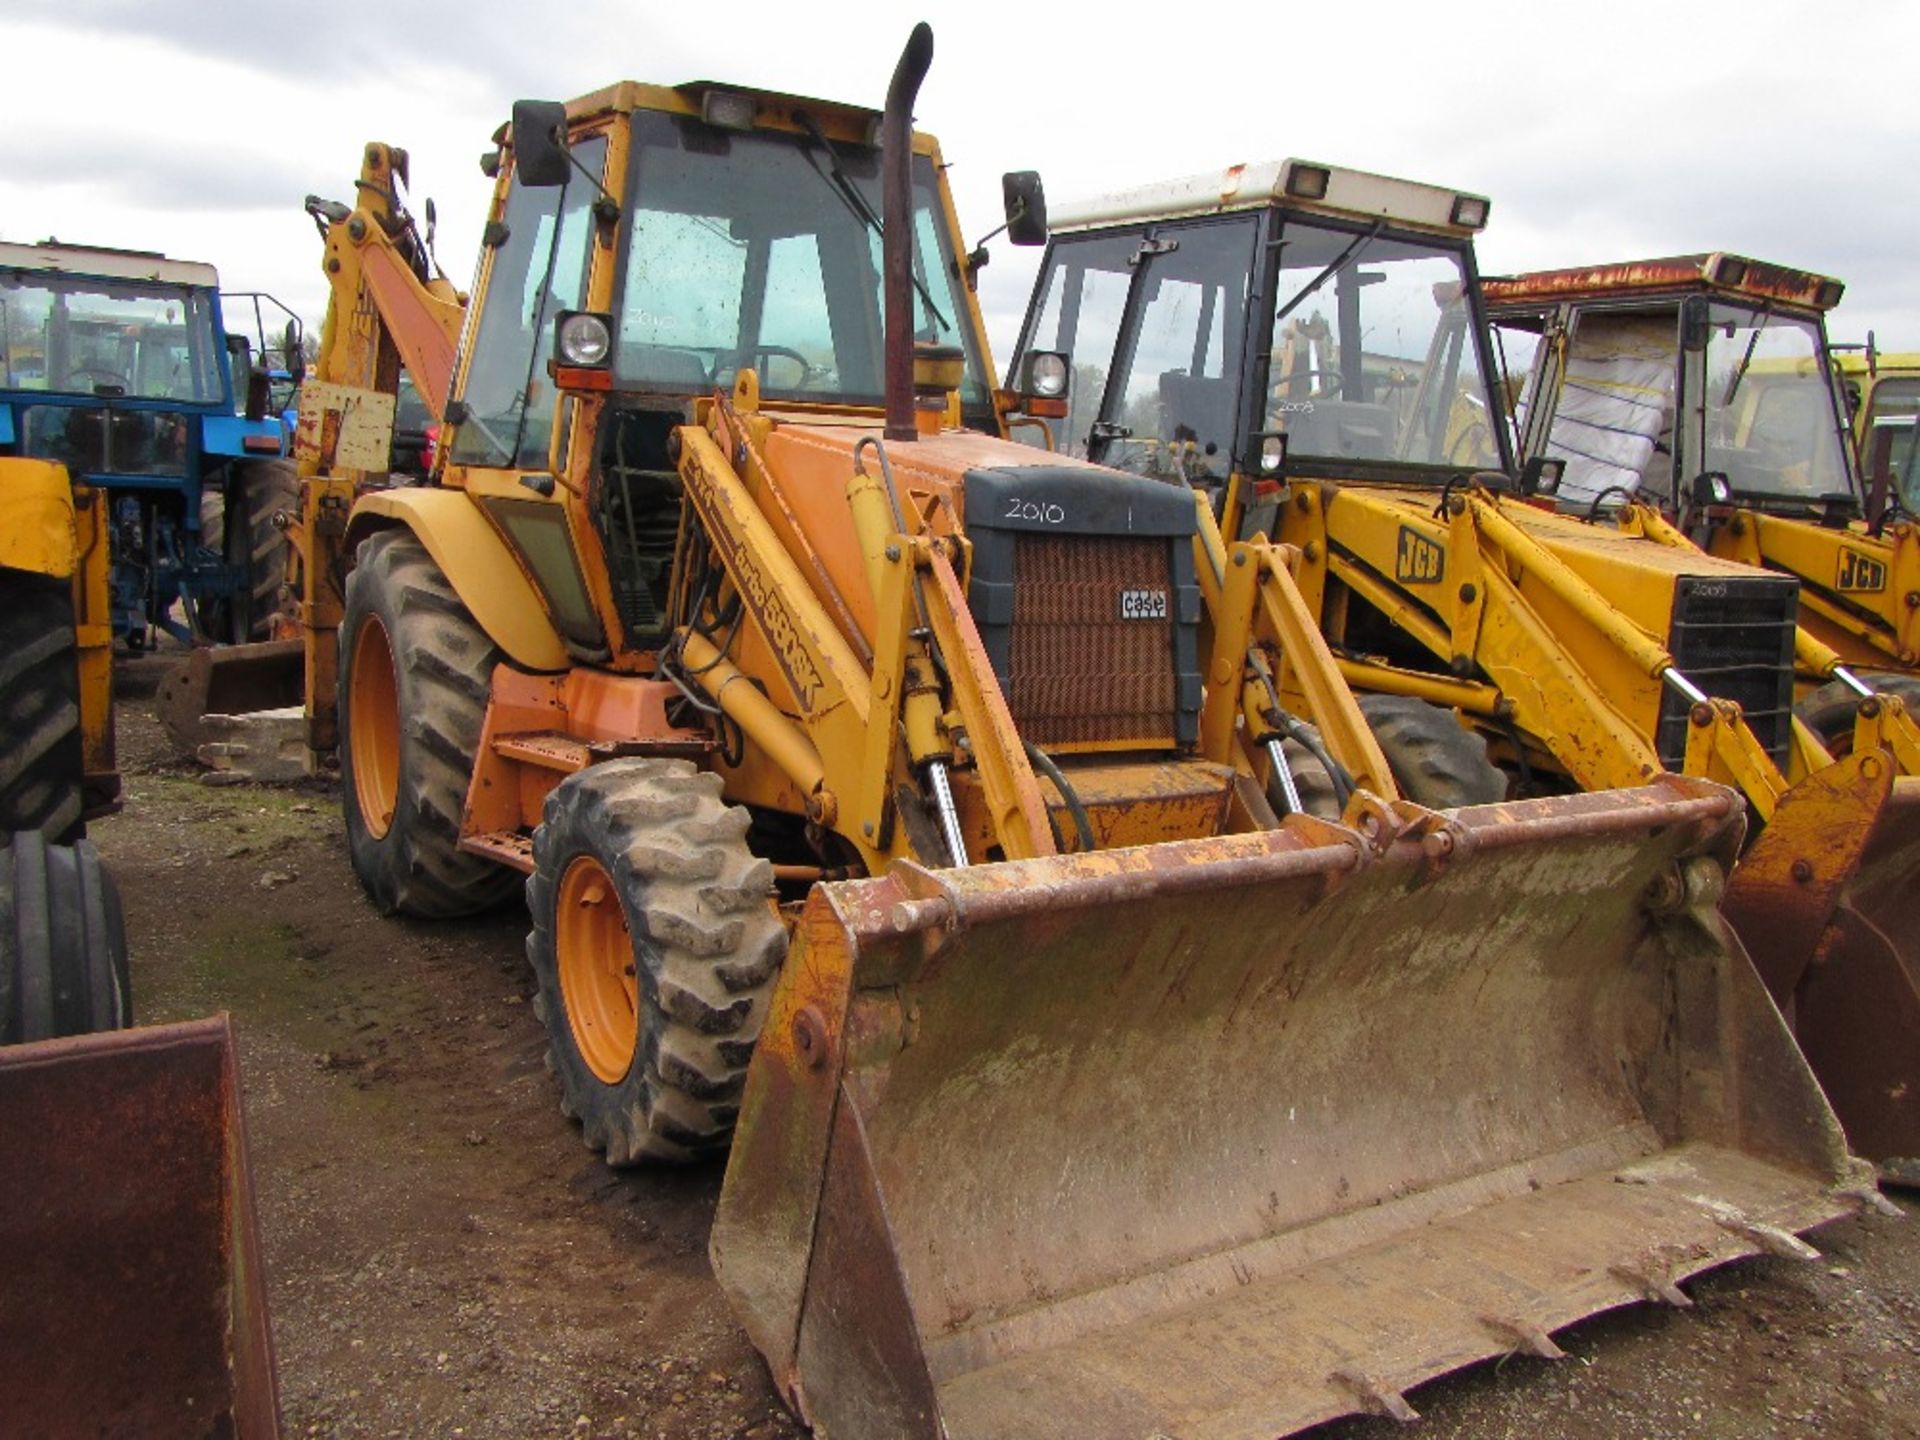 Case 580SK Turbo Wheeled Digger c/w 4 in 1 Bucket, Pallet Forks & 4no. Rear Buckets. Reg. No. M457 - Image 2 of 4